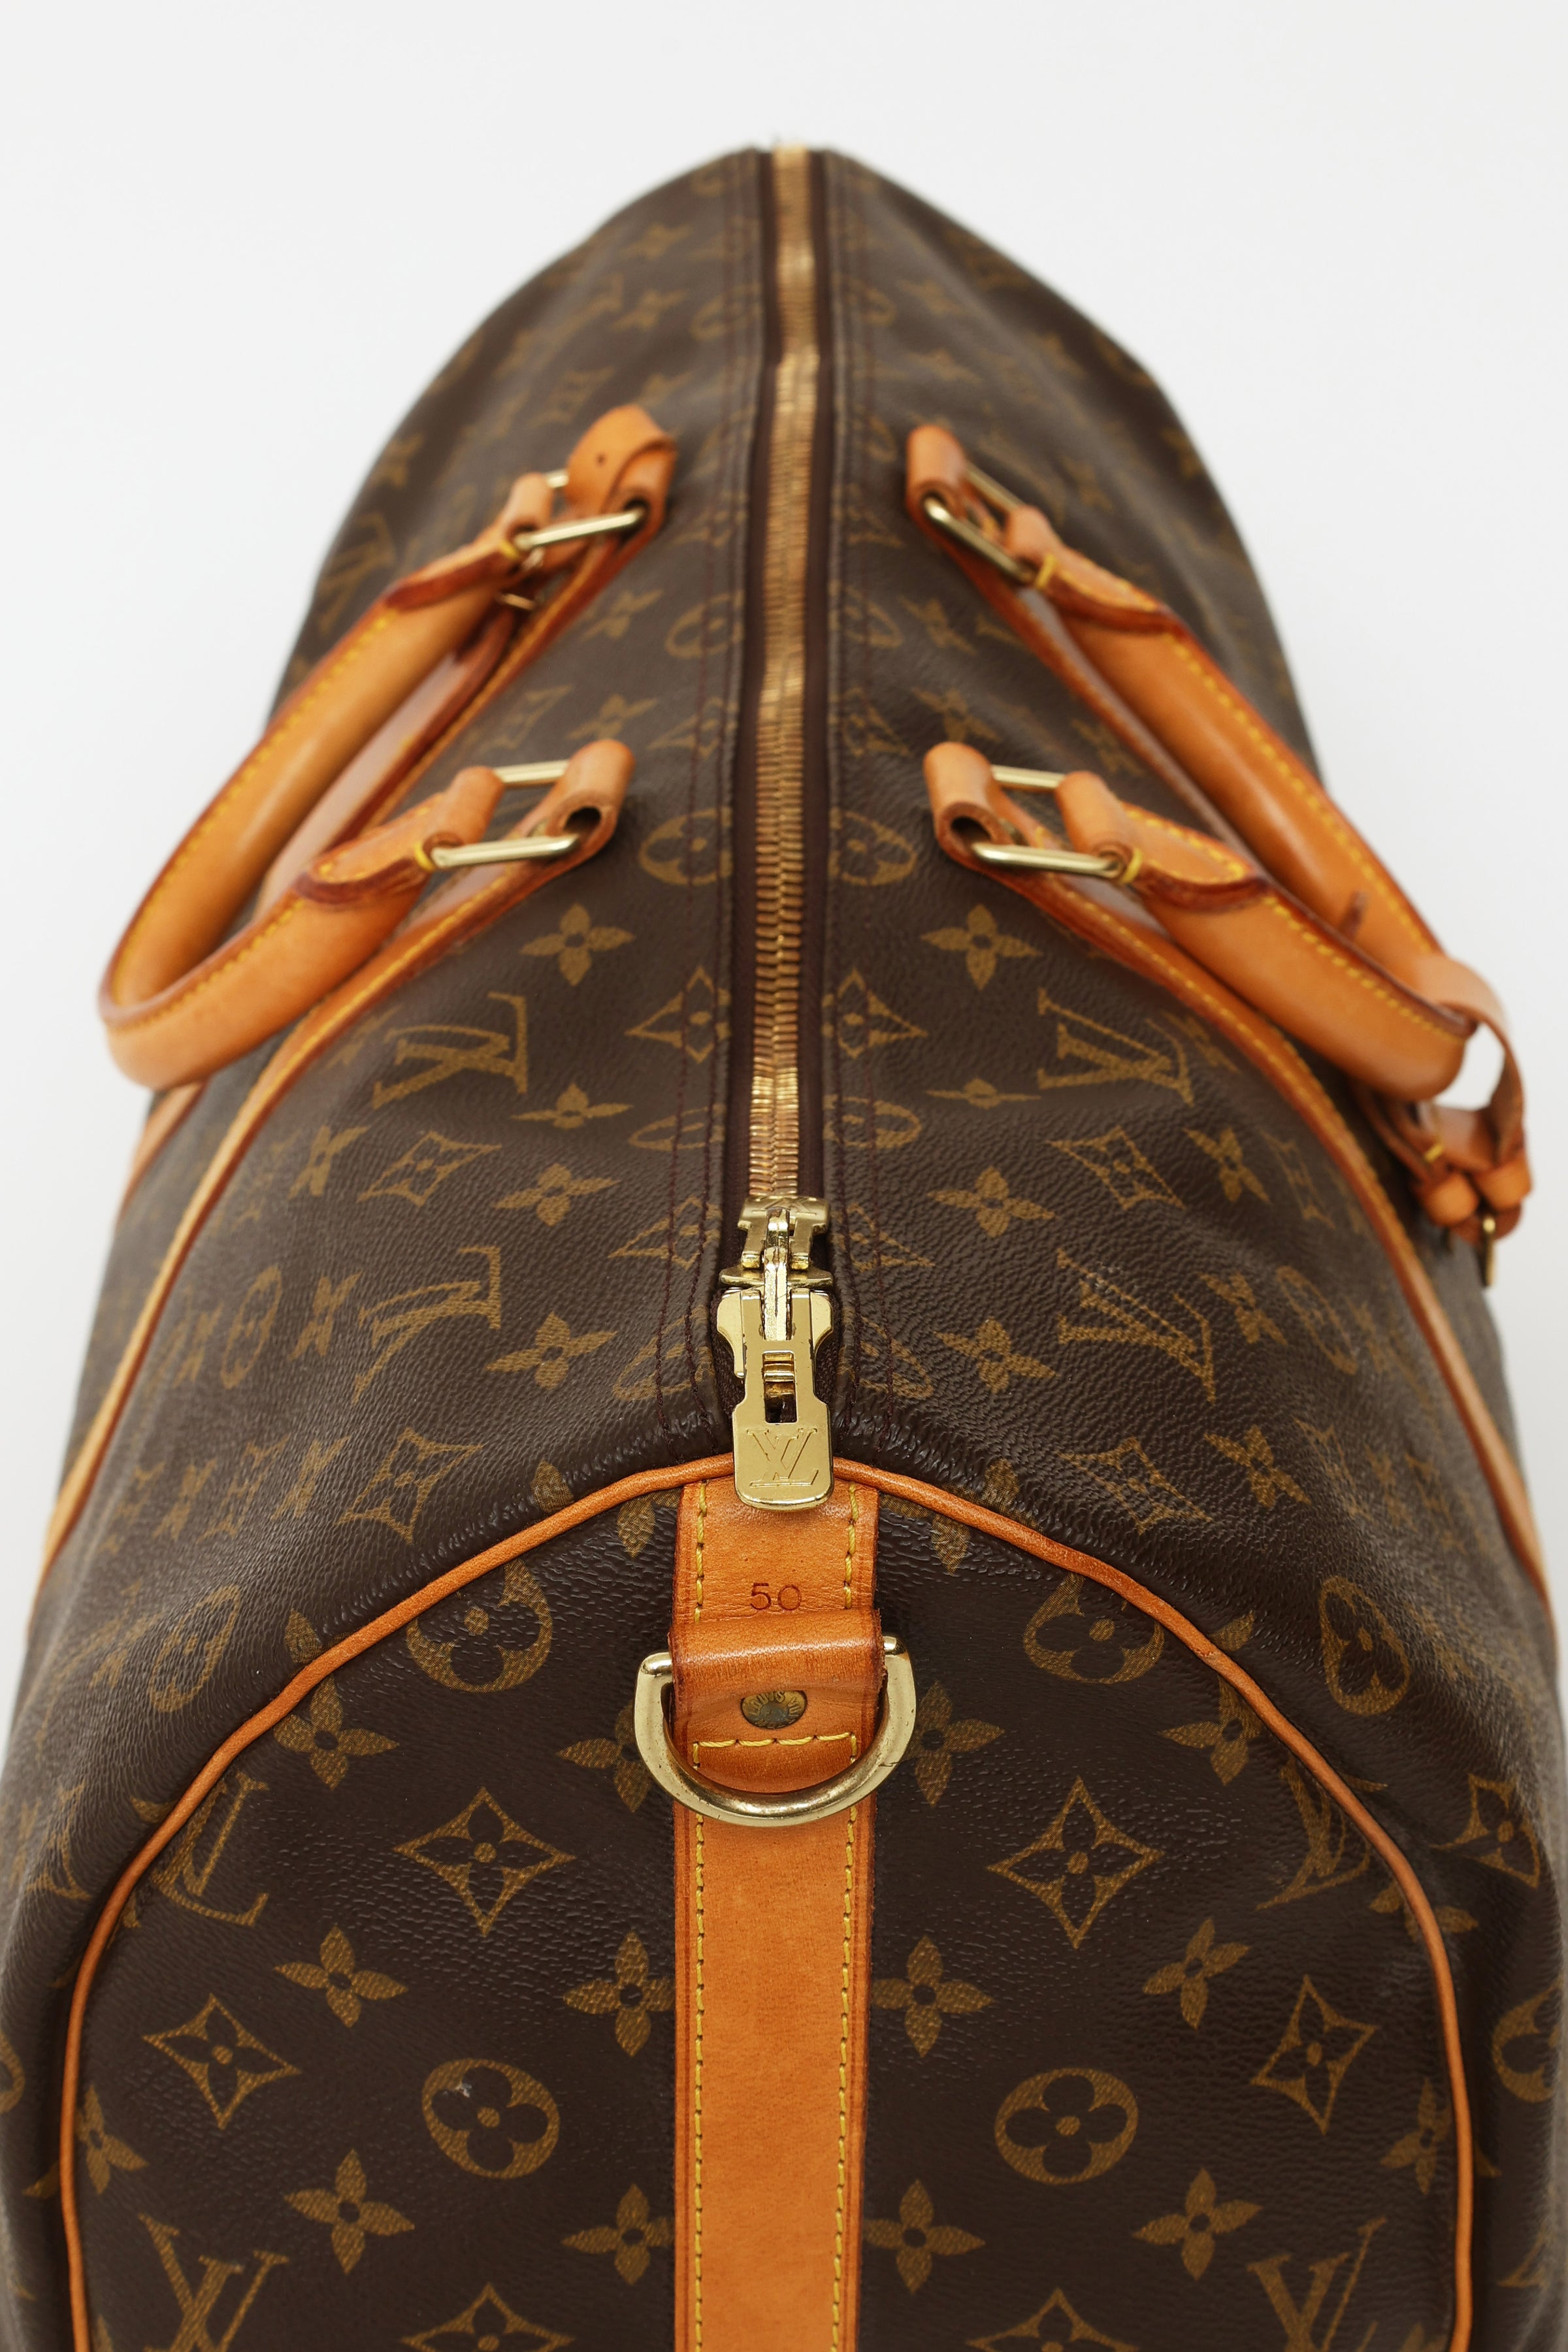 Authenticated Used Louis Vuitton Keepall Bandouliere 50 Women's